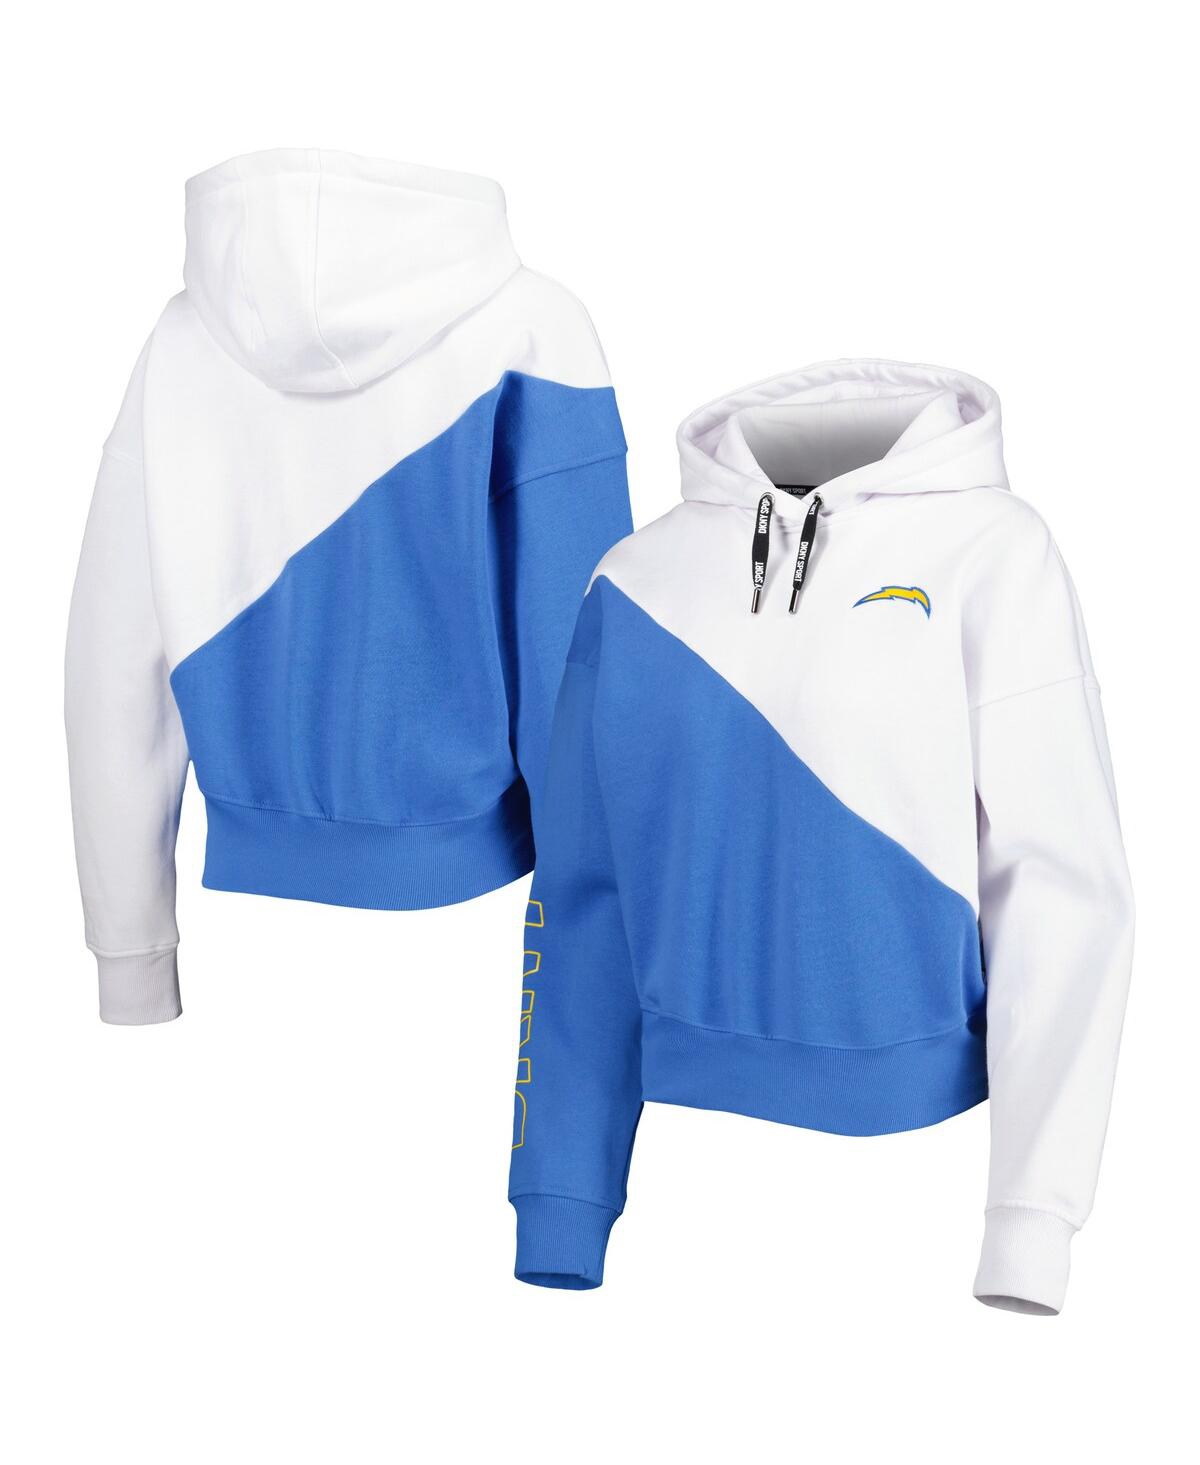 Women's Dkny Sport White and Powder Blue Los Angeles Chargers Bobbi Color Blocked Pullover Hoodie - White, Powder Blue